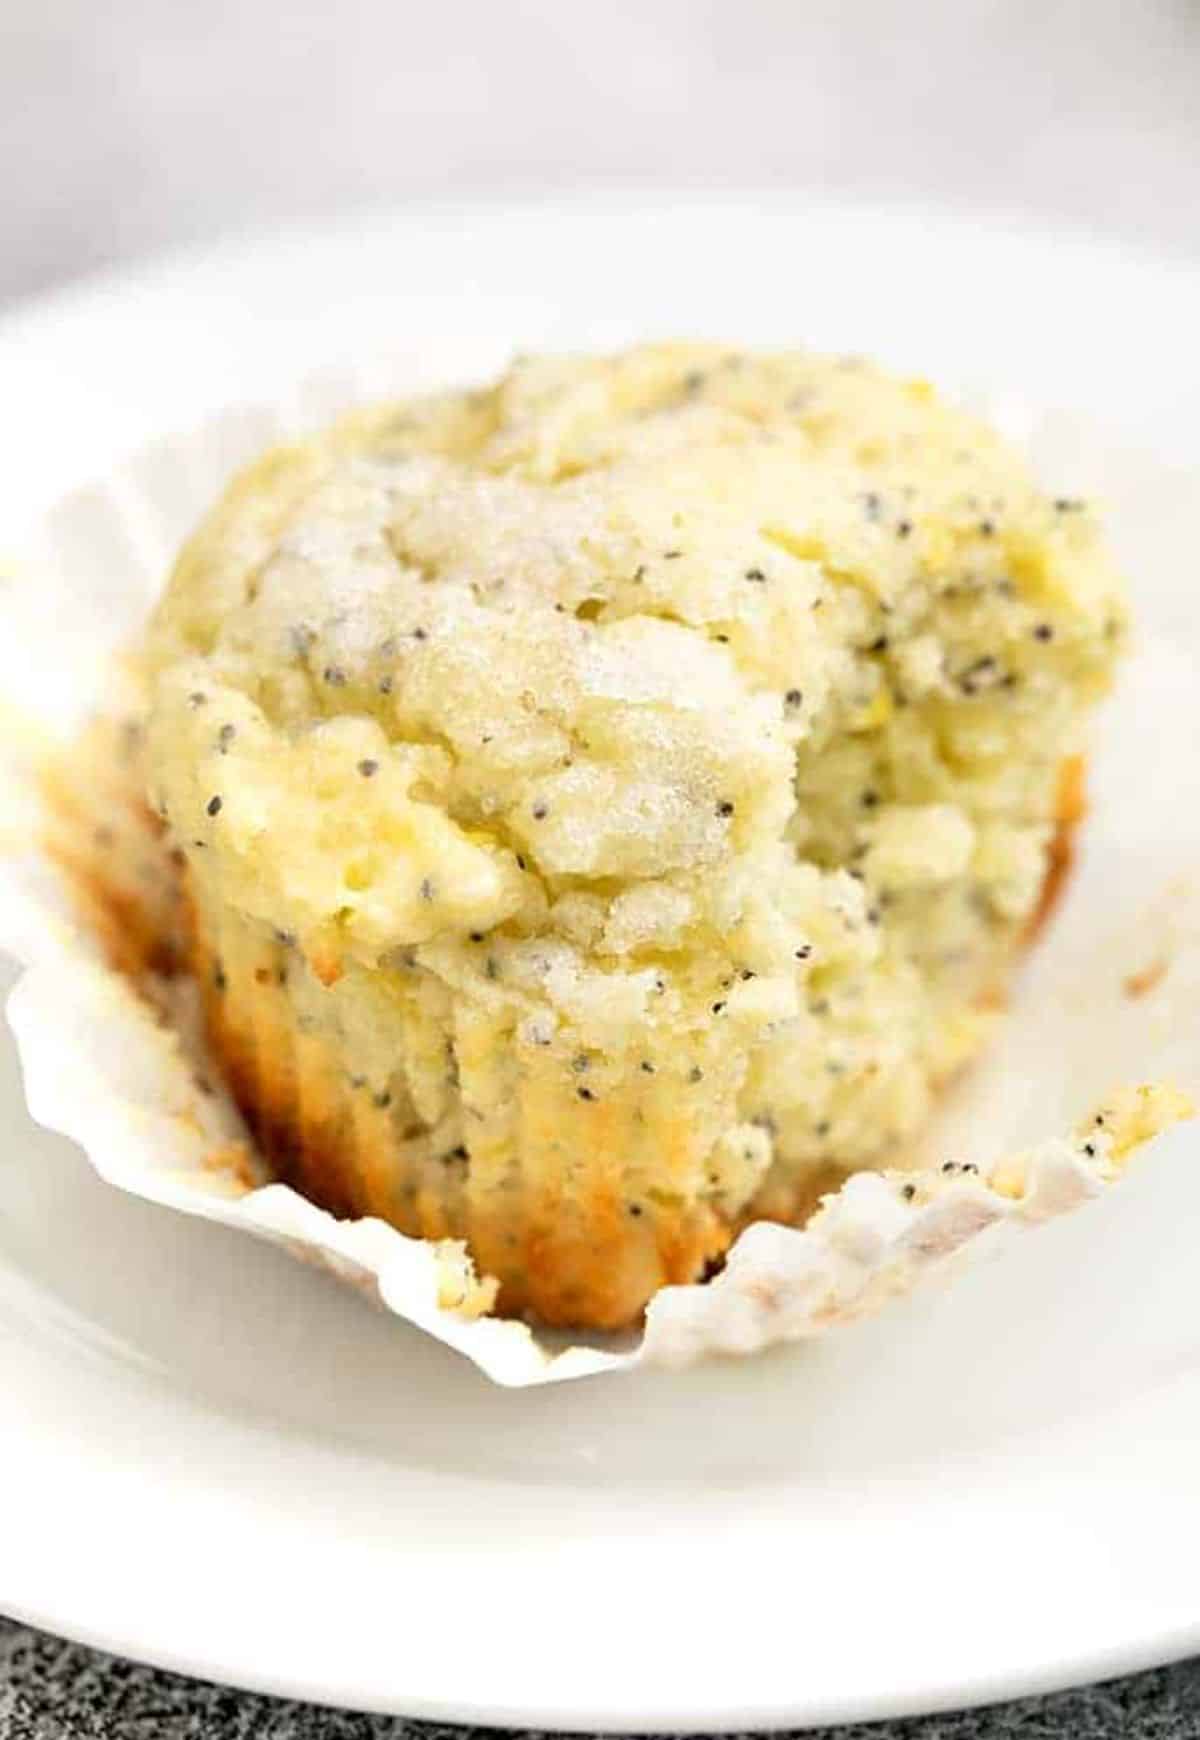 Delicious Gluten-Free Lemon Poppyseed Muffin on a white plate.